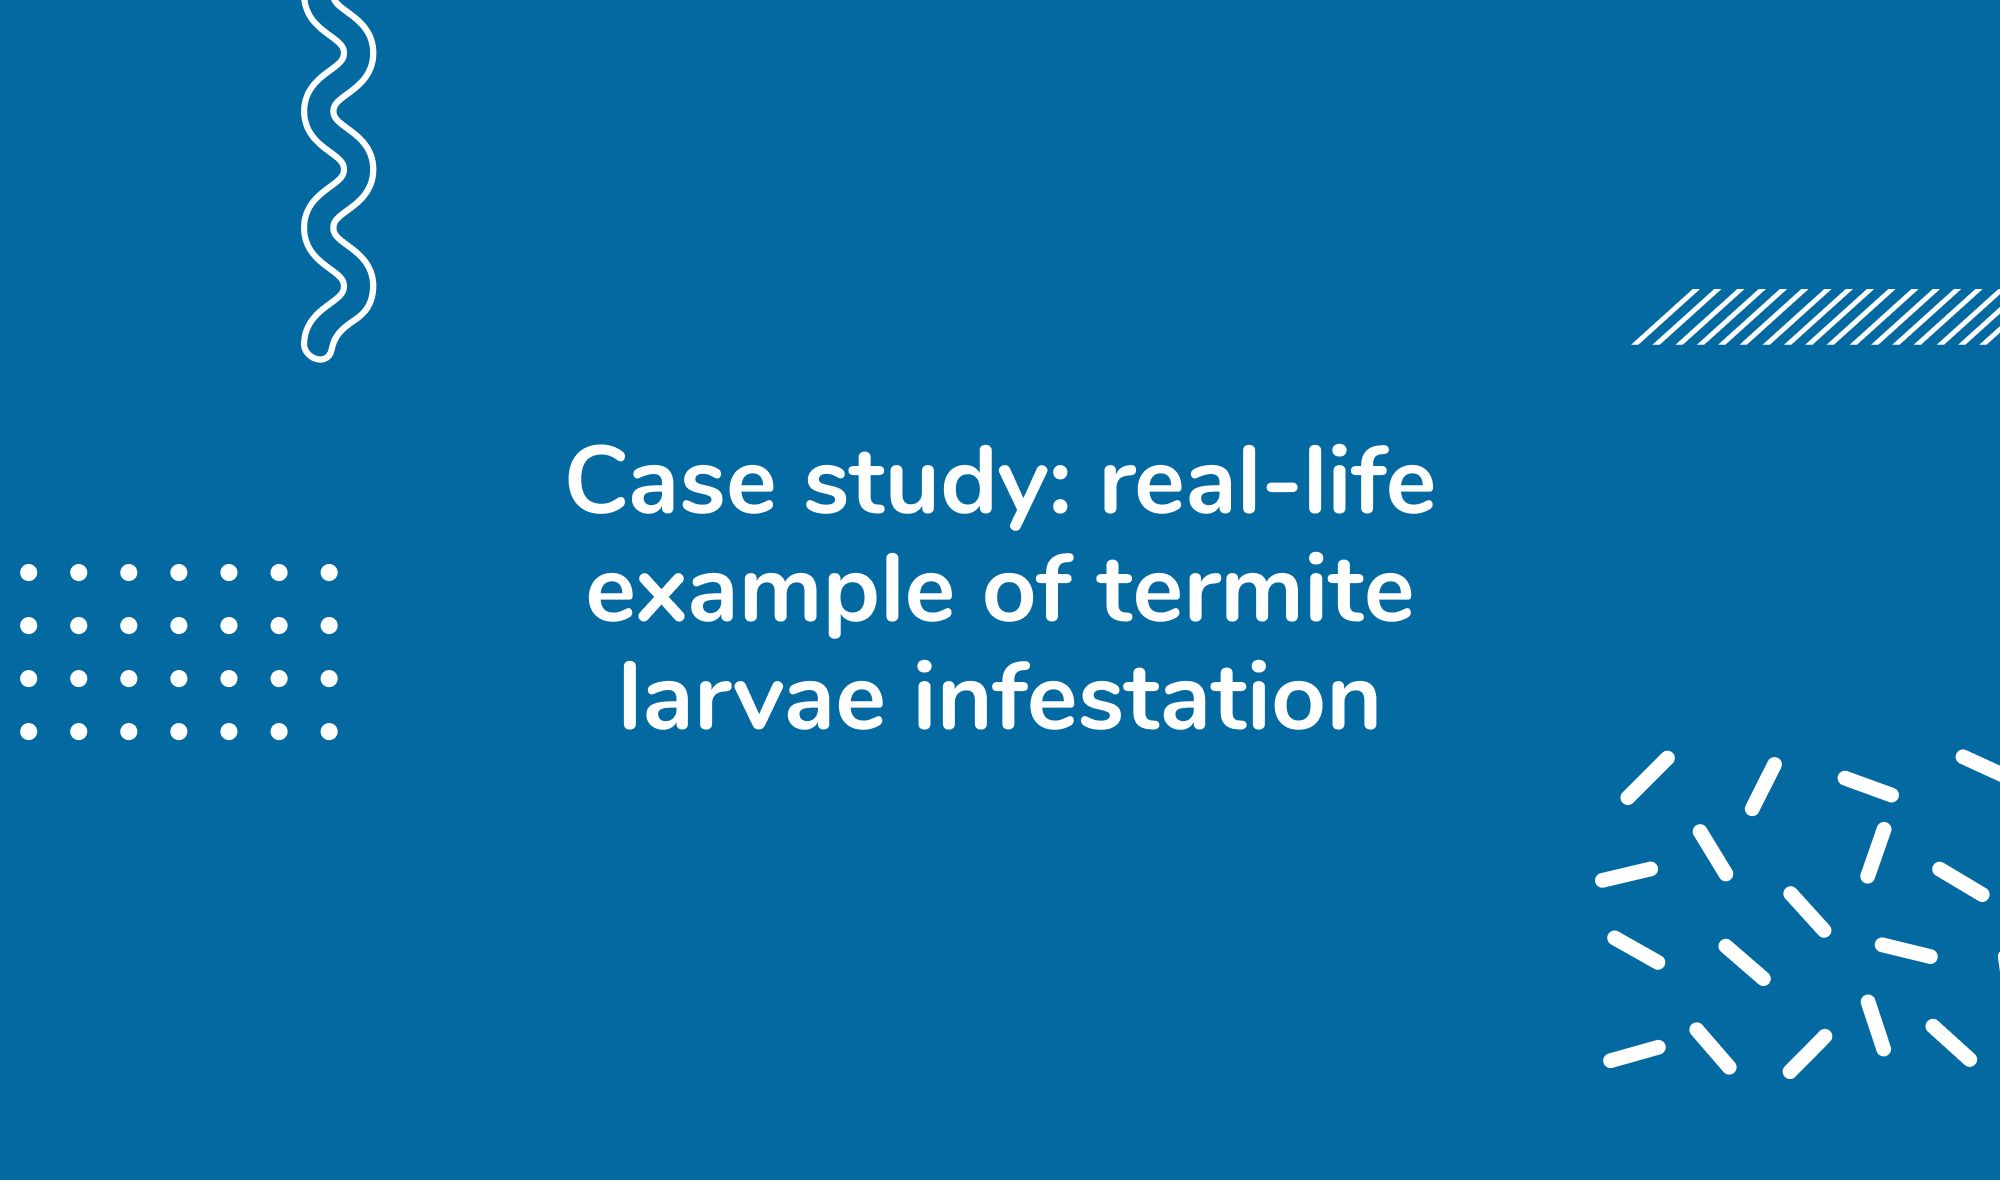 Case study: real-life example of termite larvae infestation